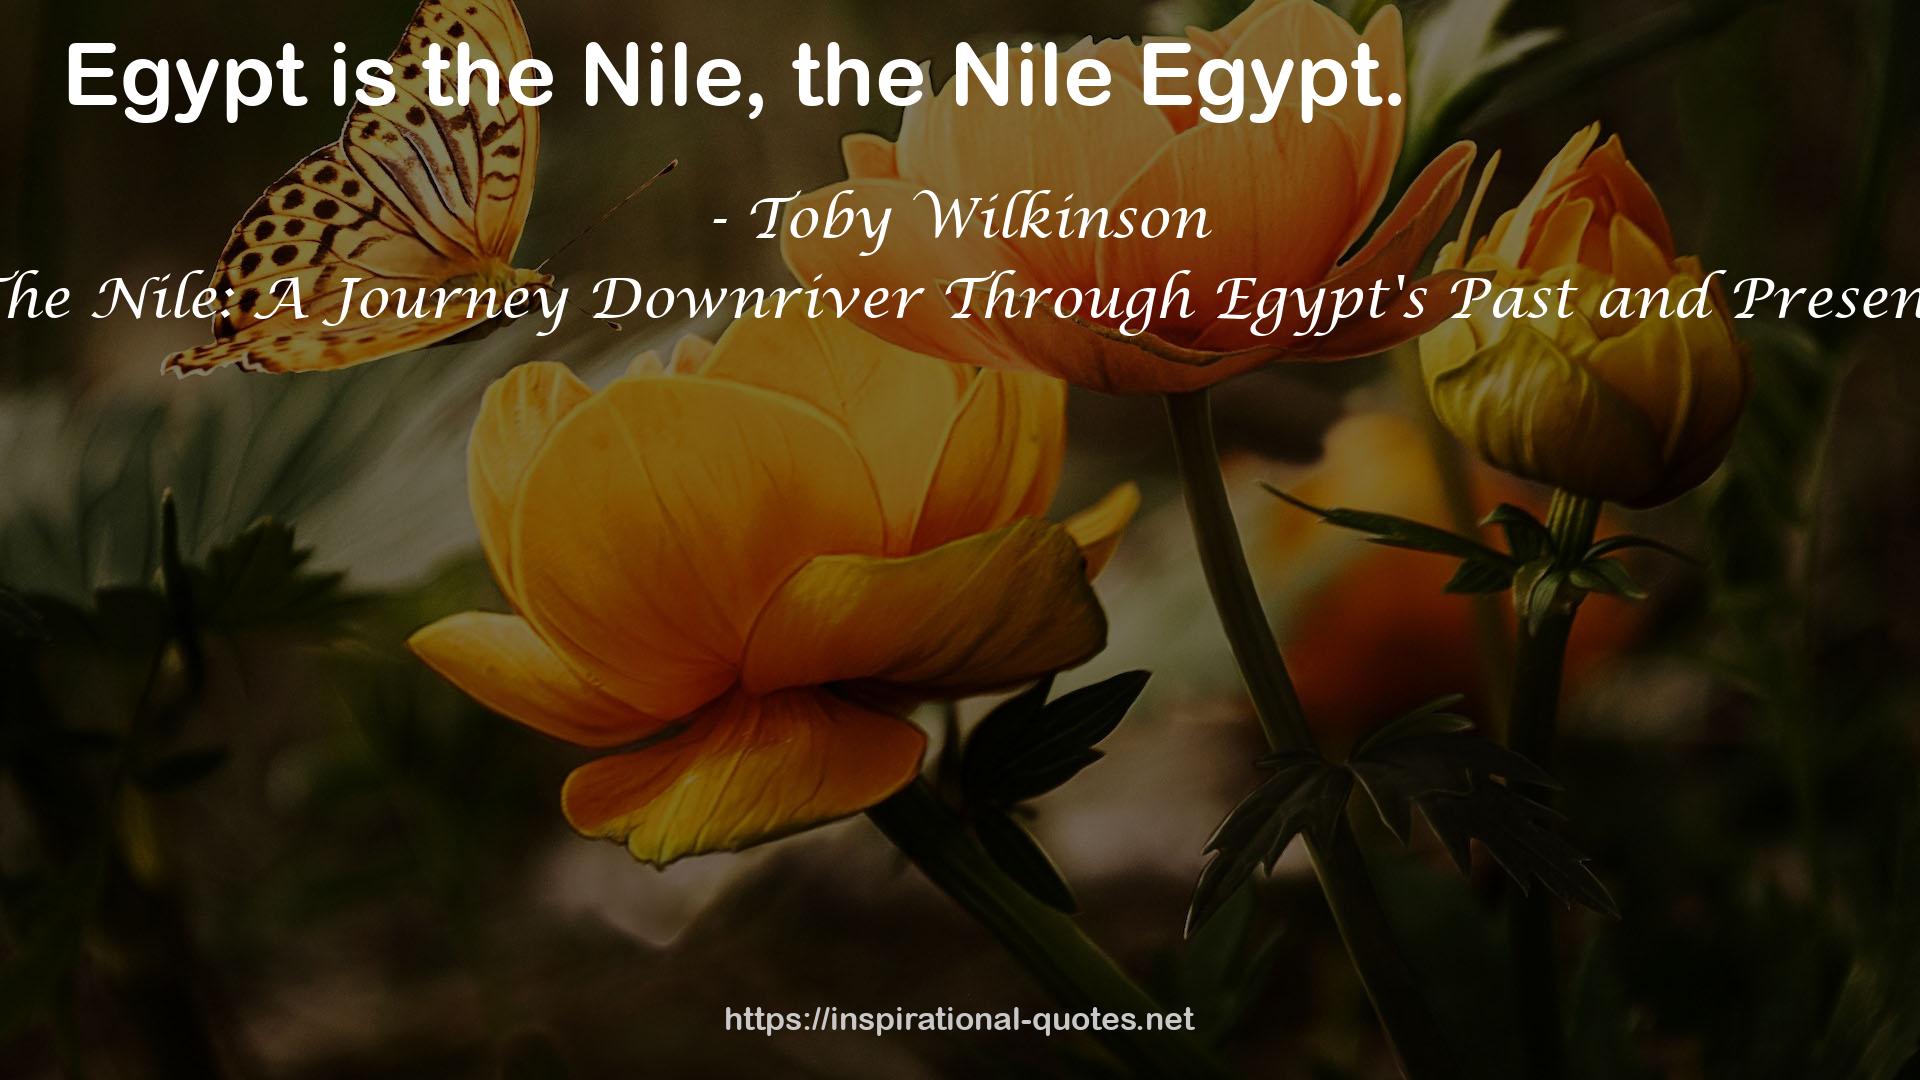 The Nile: A Journey Downriver Through Egypt's Past and Present QUOTES